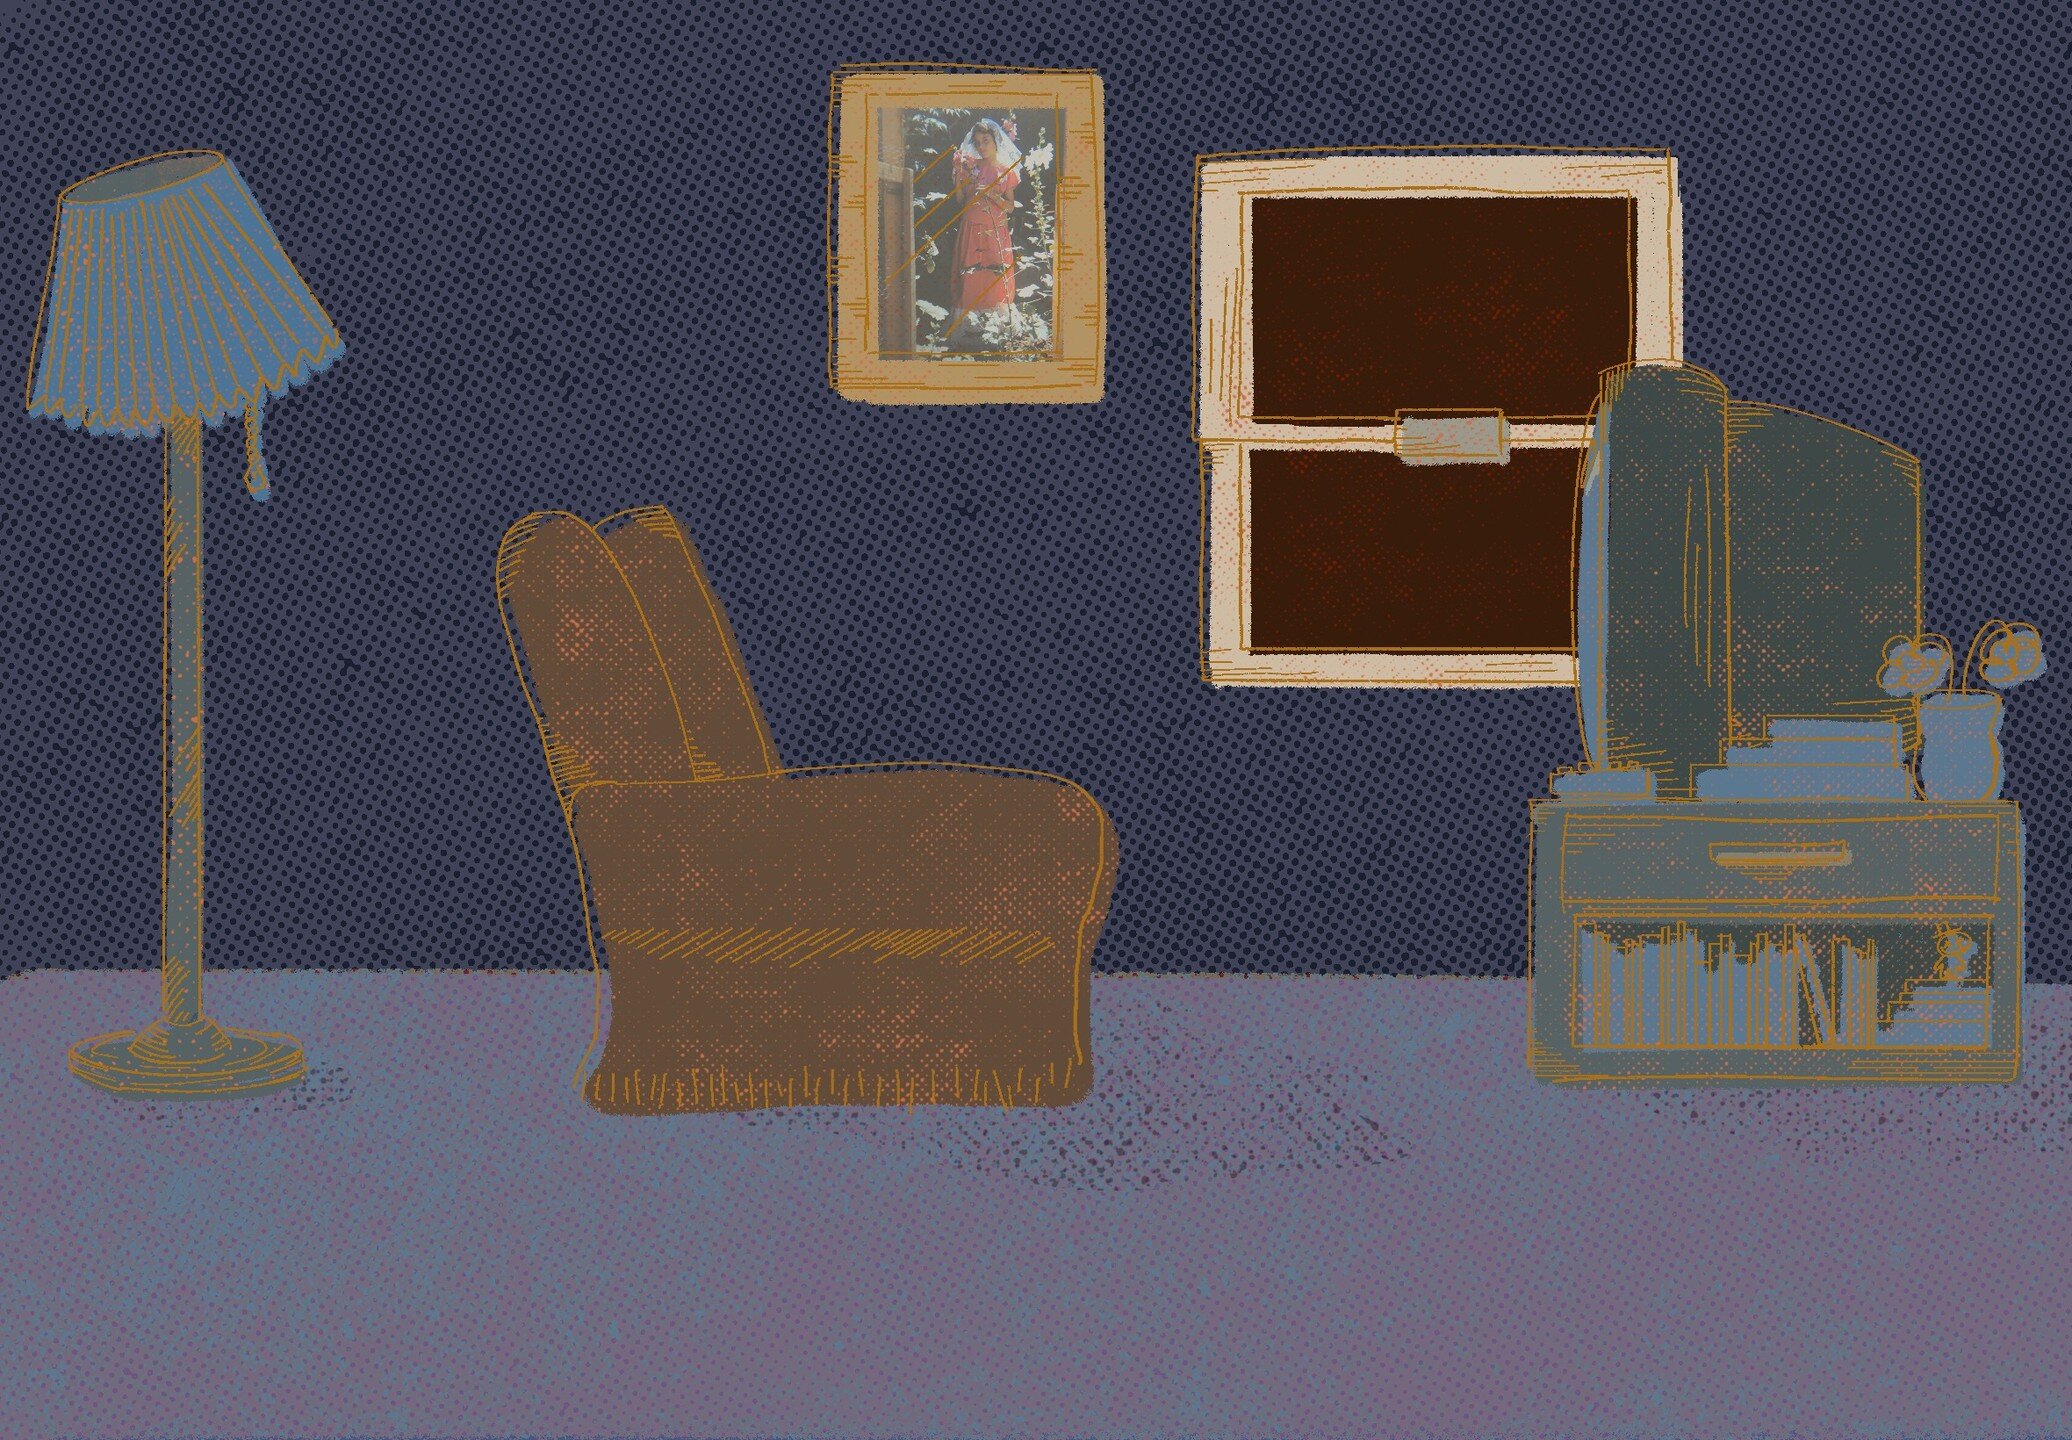 some simple backgrounds peep my gramma #2d #2danimation #backgrounds